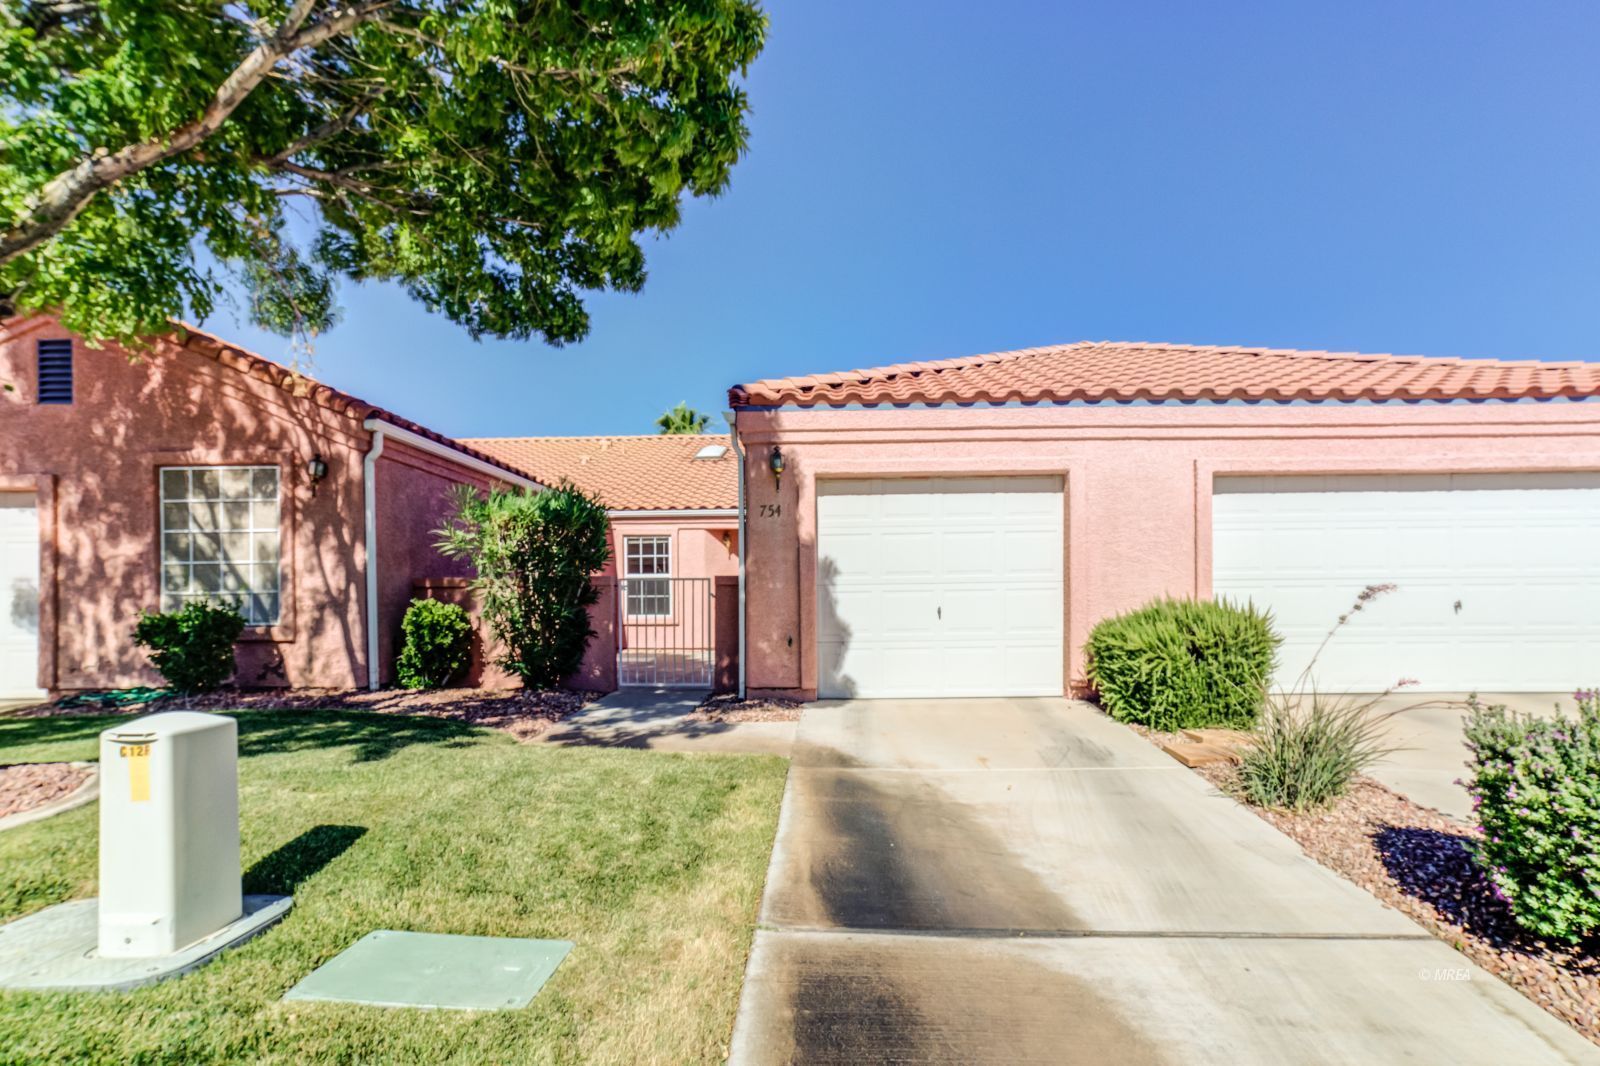 754 Peartree , Mesquite NV 89027